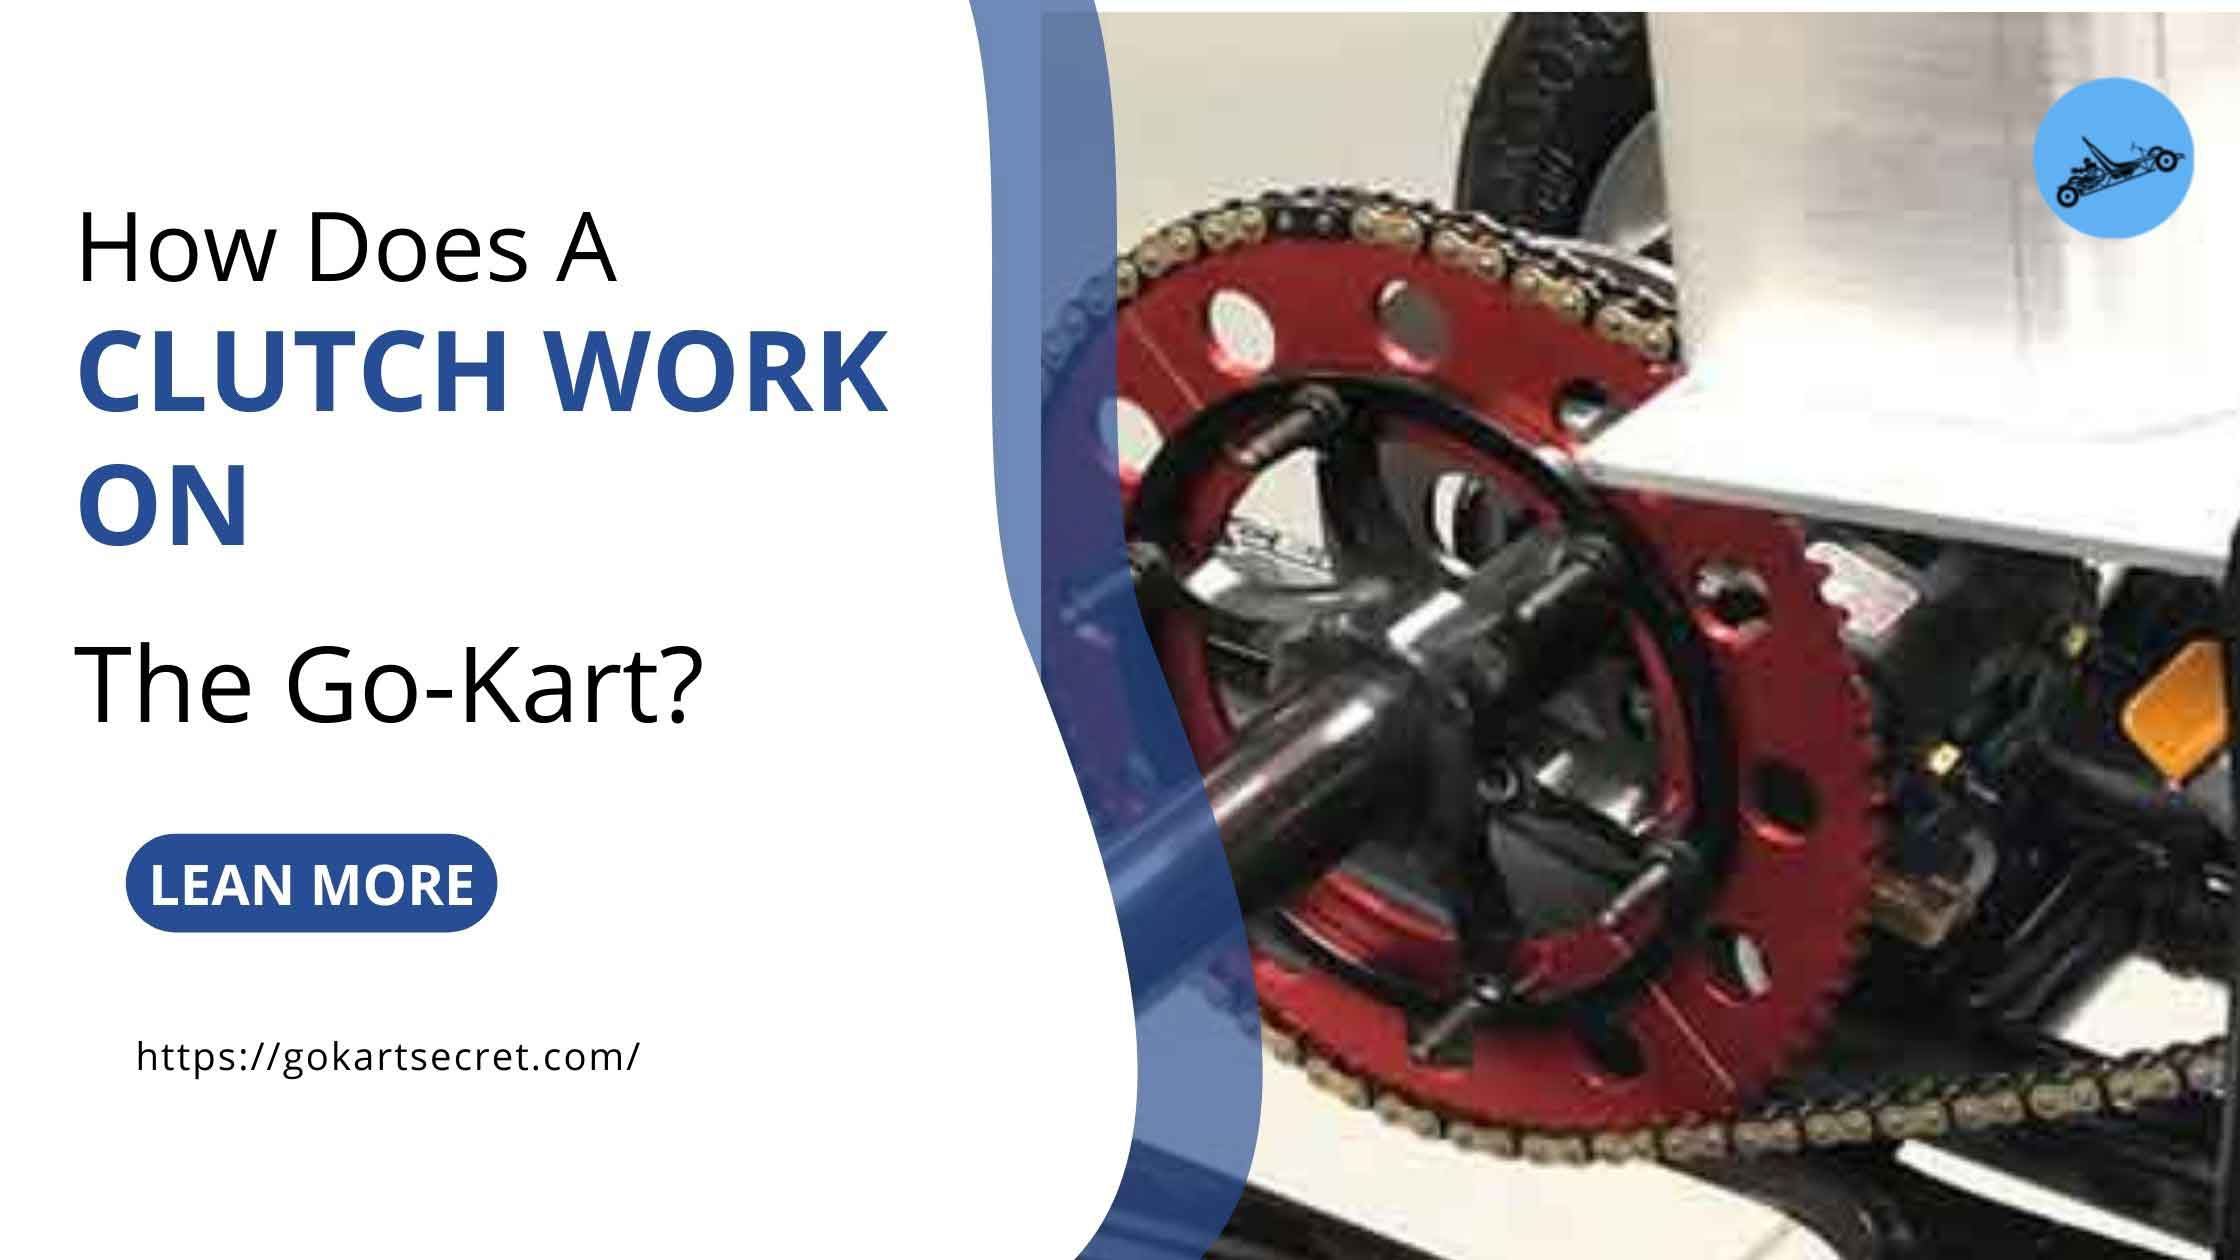 How Does A Clutch Work On The Go-Kart?